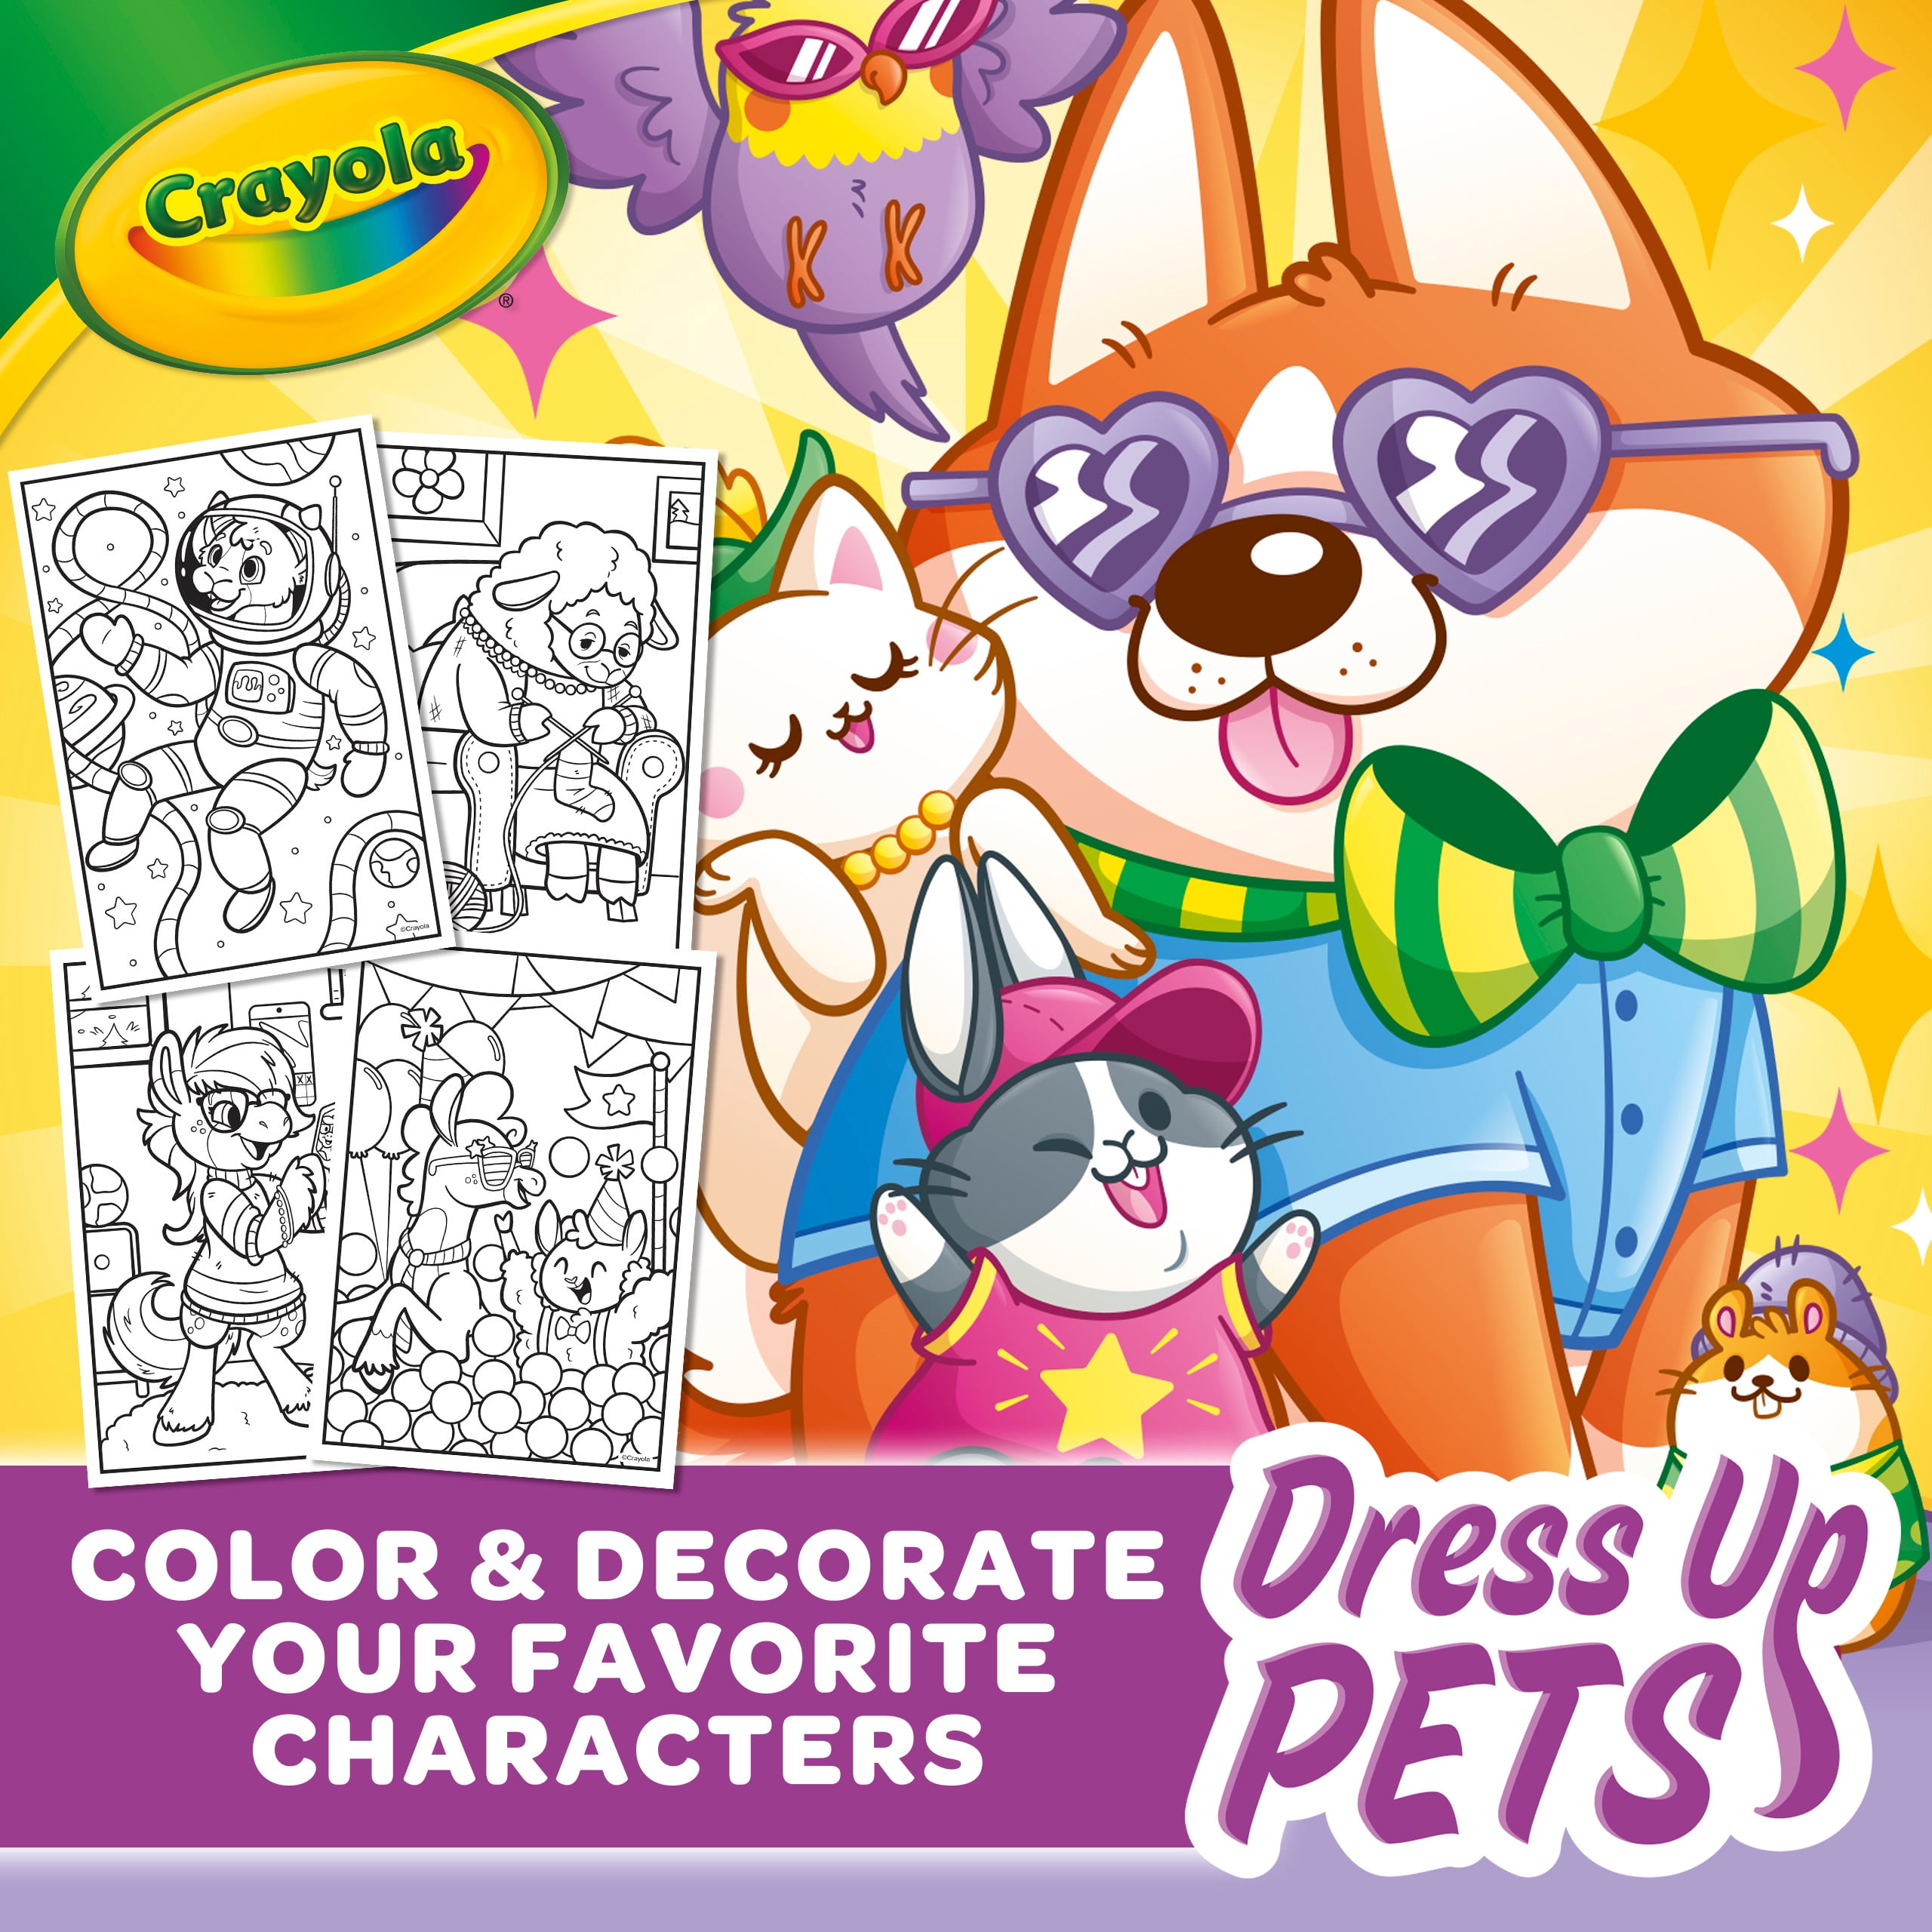 Crayola Dress up Pets Coloring Book, Gift for Kids, 48 Coloring